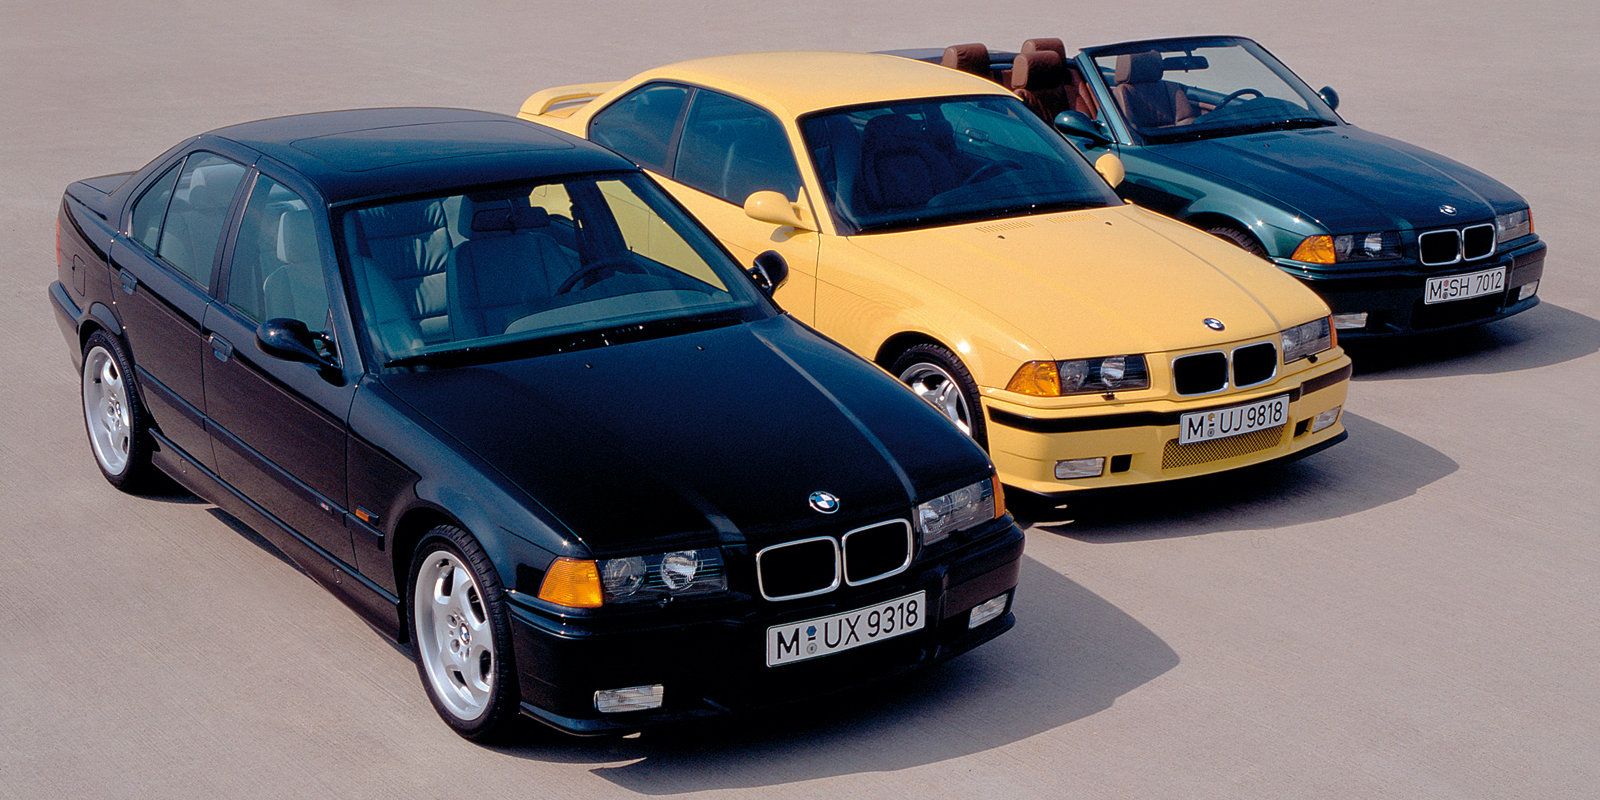 BMW E36 M3 Buyer's Guide: Everything You Need to Know